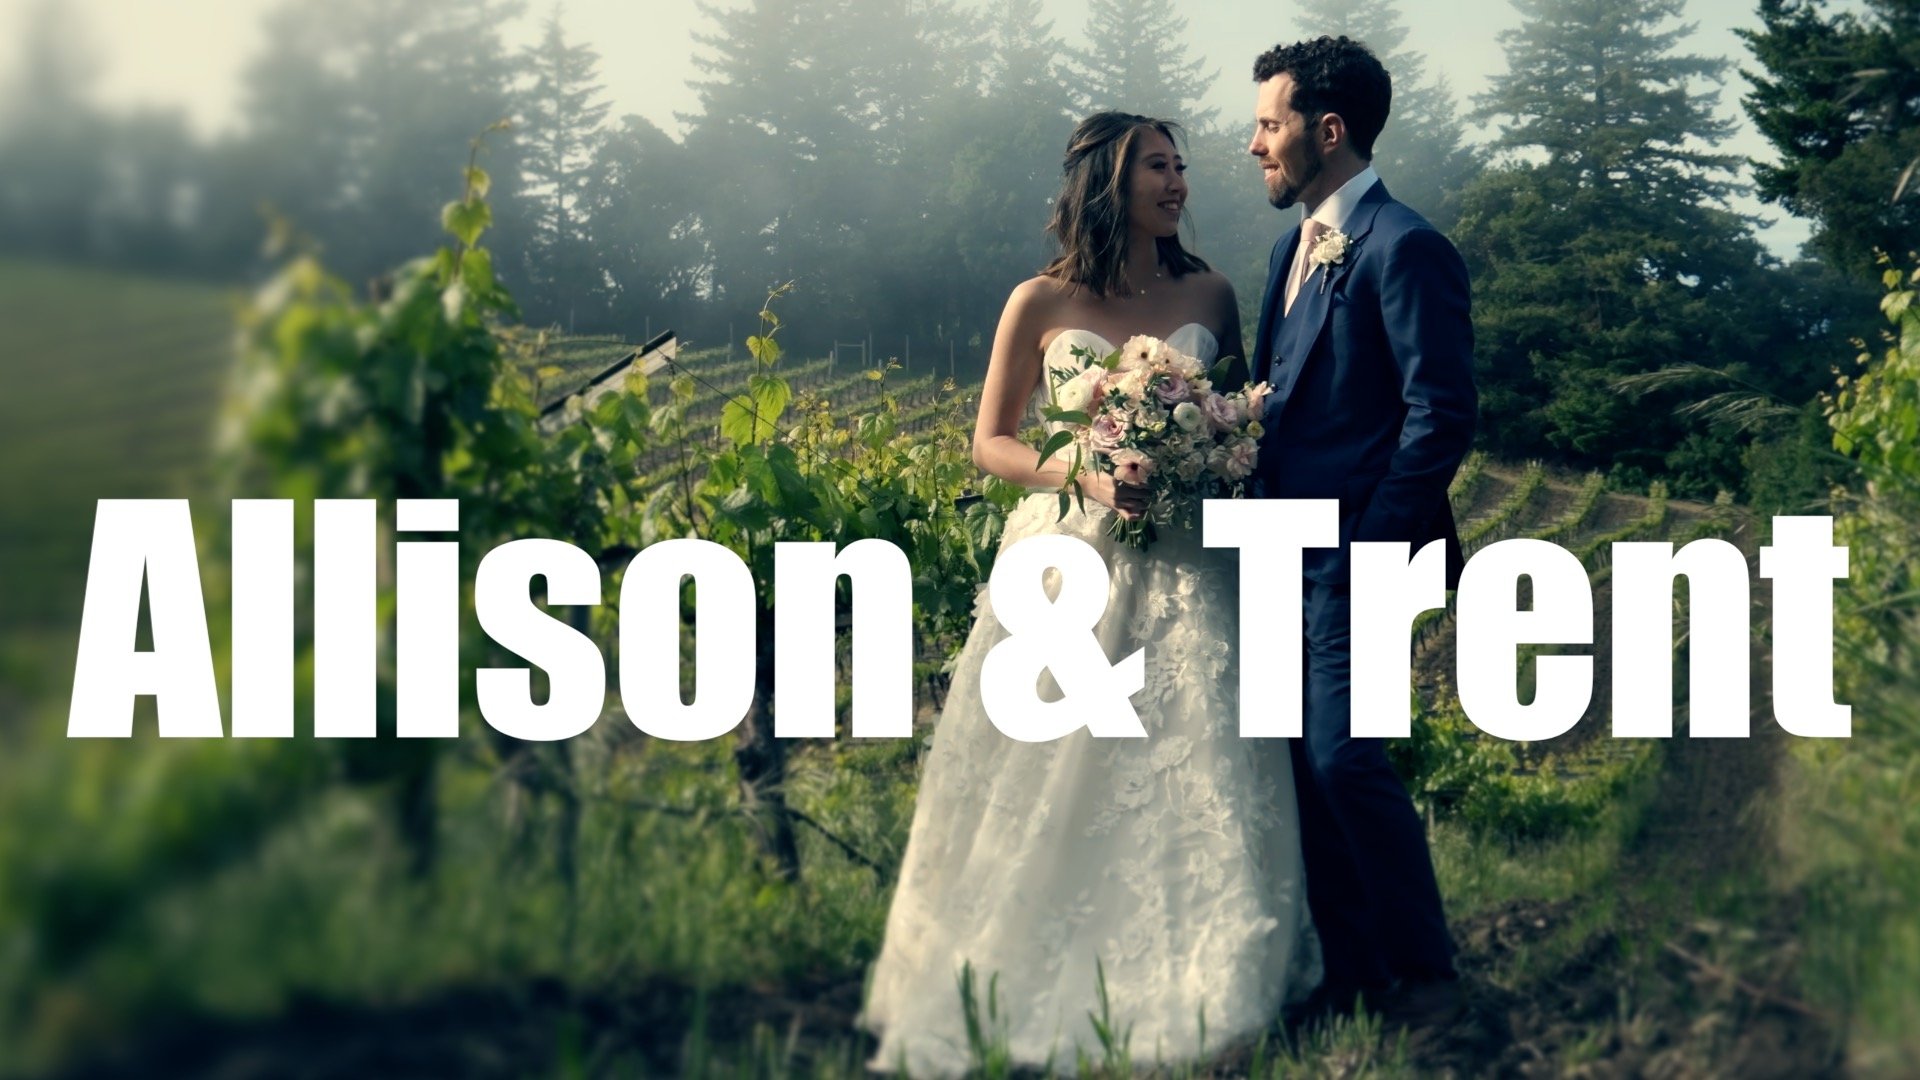  The Wedding Film of Allison &amp; Trent filmed at  the   Thomas Fogarty Winery  in Woodside CA. 